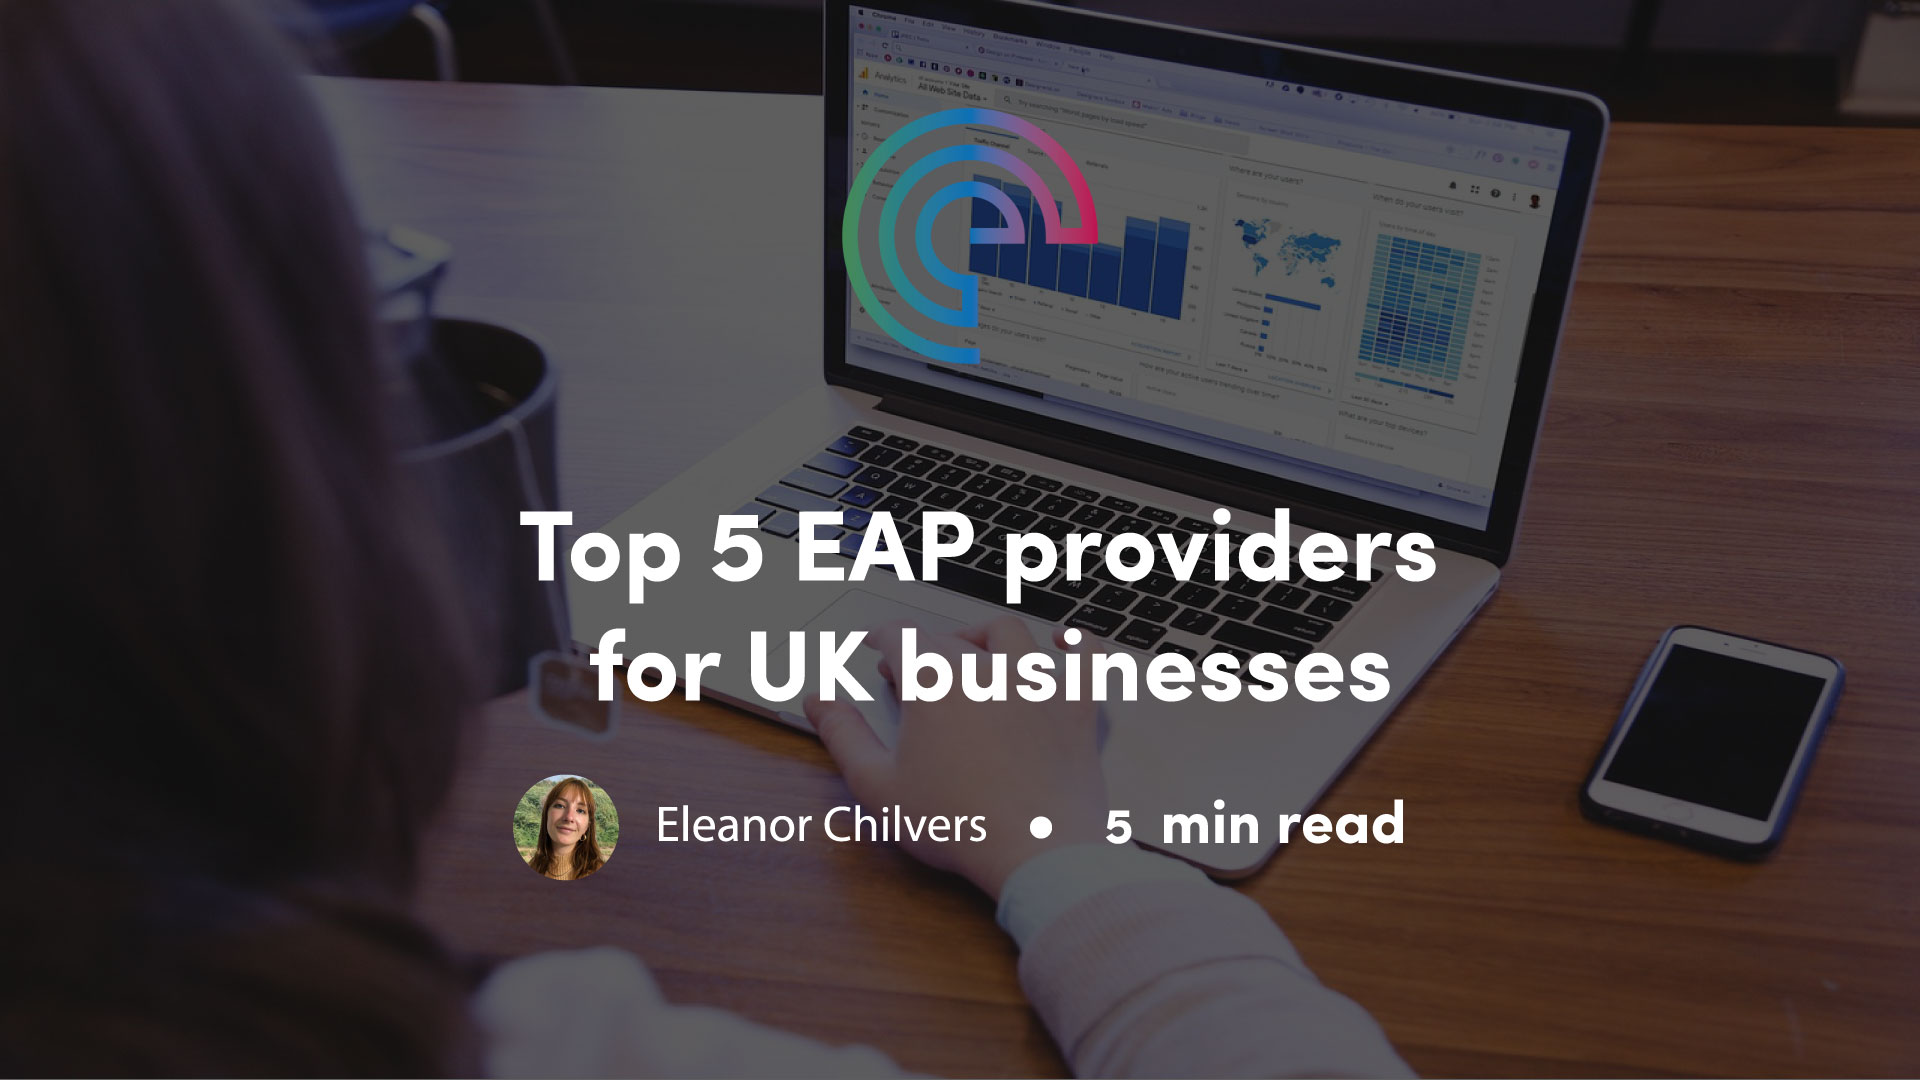 Top 5 EAP providers for UK businesses